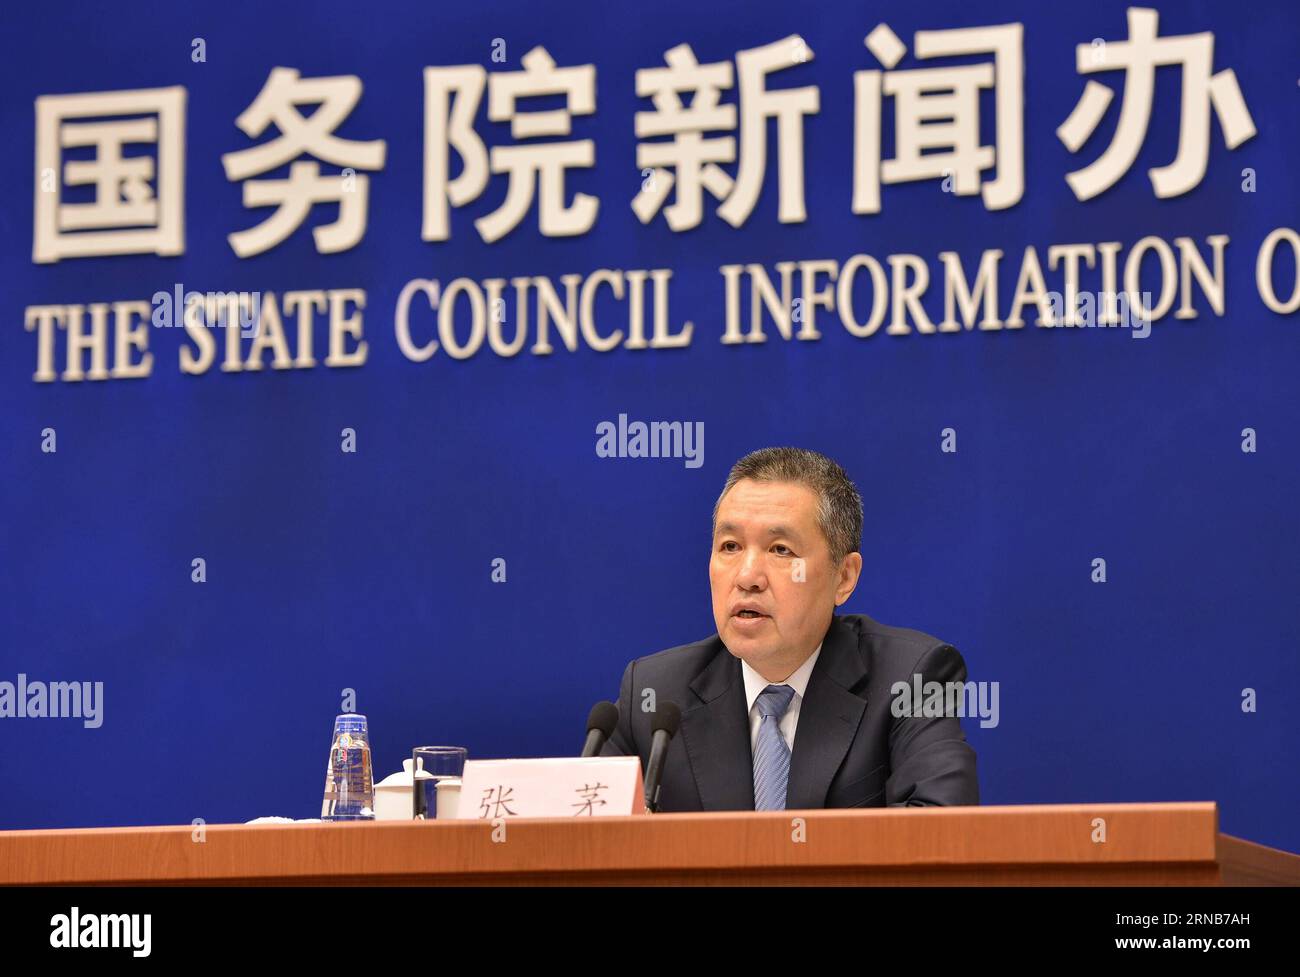 (160222) -- BEIJING, Feb. 22, 2016 -- Zhang Mao, head of the State Administration for Industry and Commerce, speaks during a press conference concerning China s business system reform held by the State Council Information Office in Beijing, capital of China, Feb. 22, 2016. ) (wyl) CHINA-BEIJING-BUSINESS-SYSTEM REFORM-PRESS CONFERENCE (CN) LixXin PUBLICATIONxNOTxINxCHN   Beijing Feb 22 2016 Zhang Mao Head of The State Administration for Industry and Commerce Speaks during a Press Conference concerning China S Business System Reform Hero by The State Council Information Office in Beijing Capital Stock Photo